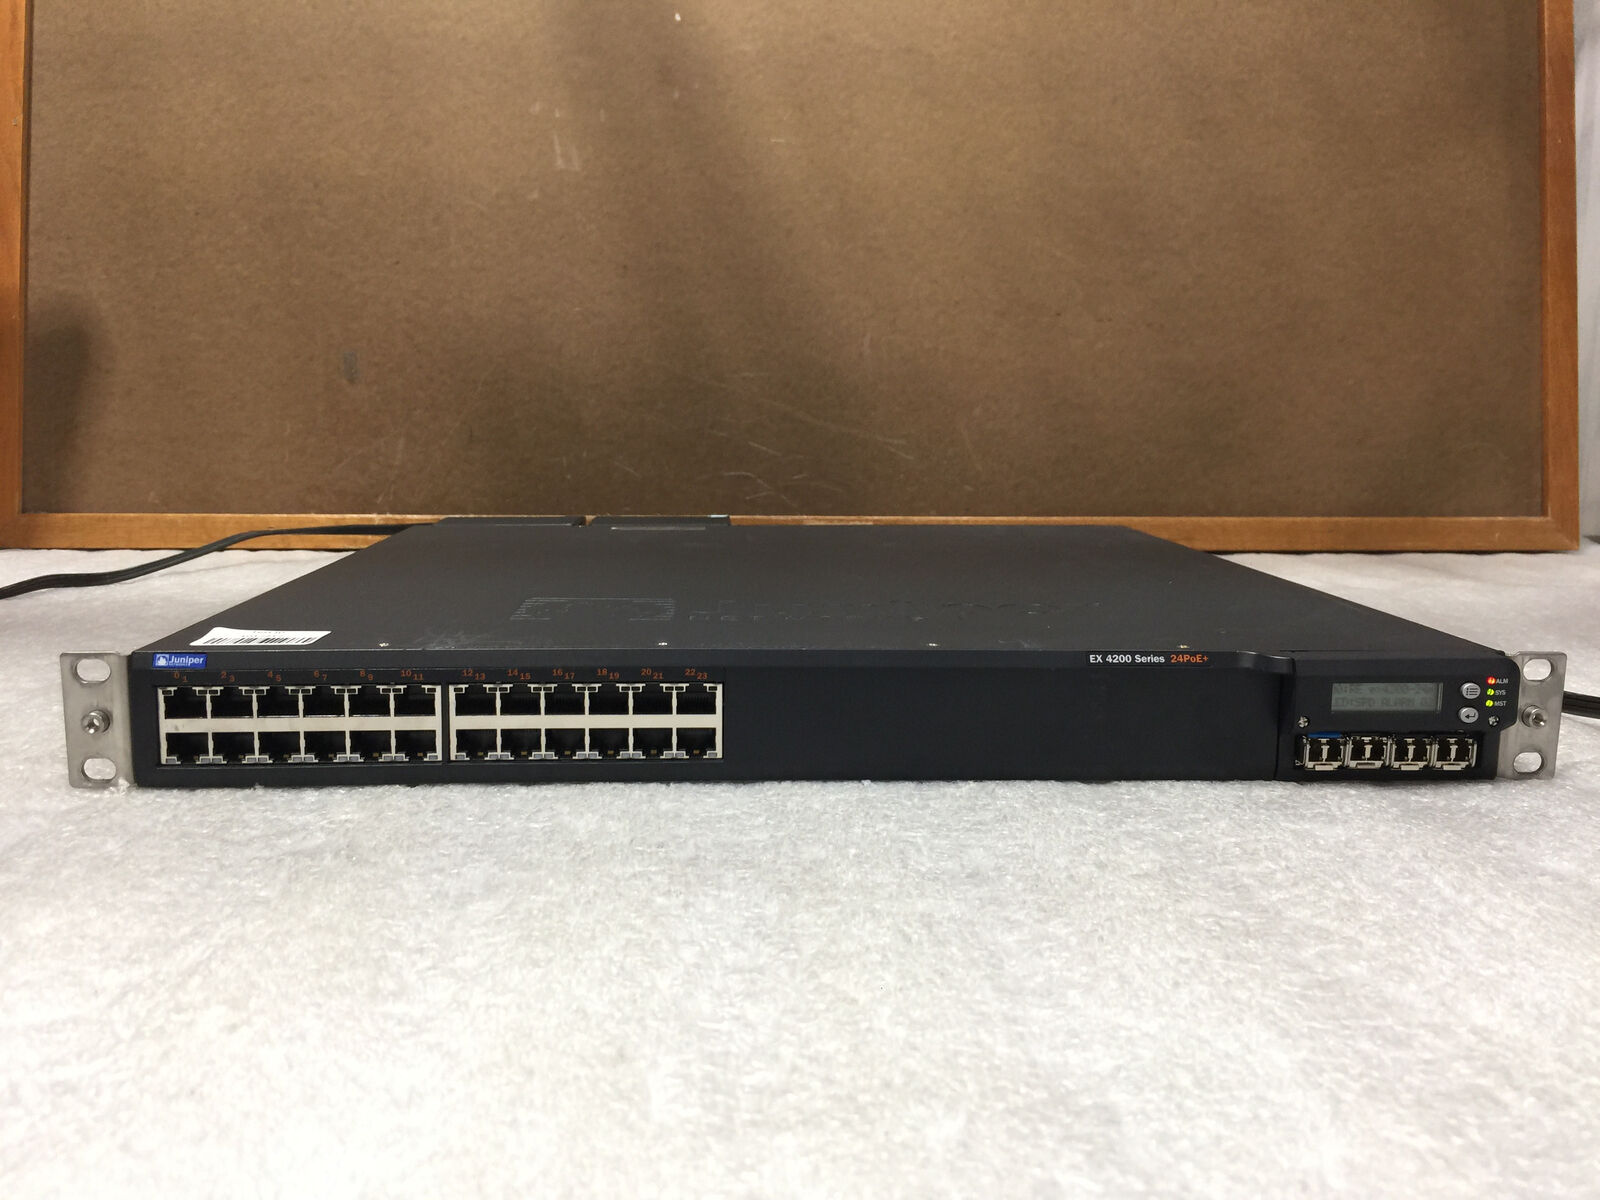 Juniper Networks EX 4200 Series 24PoE+ Ethernet Switch, with Dual PSU's